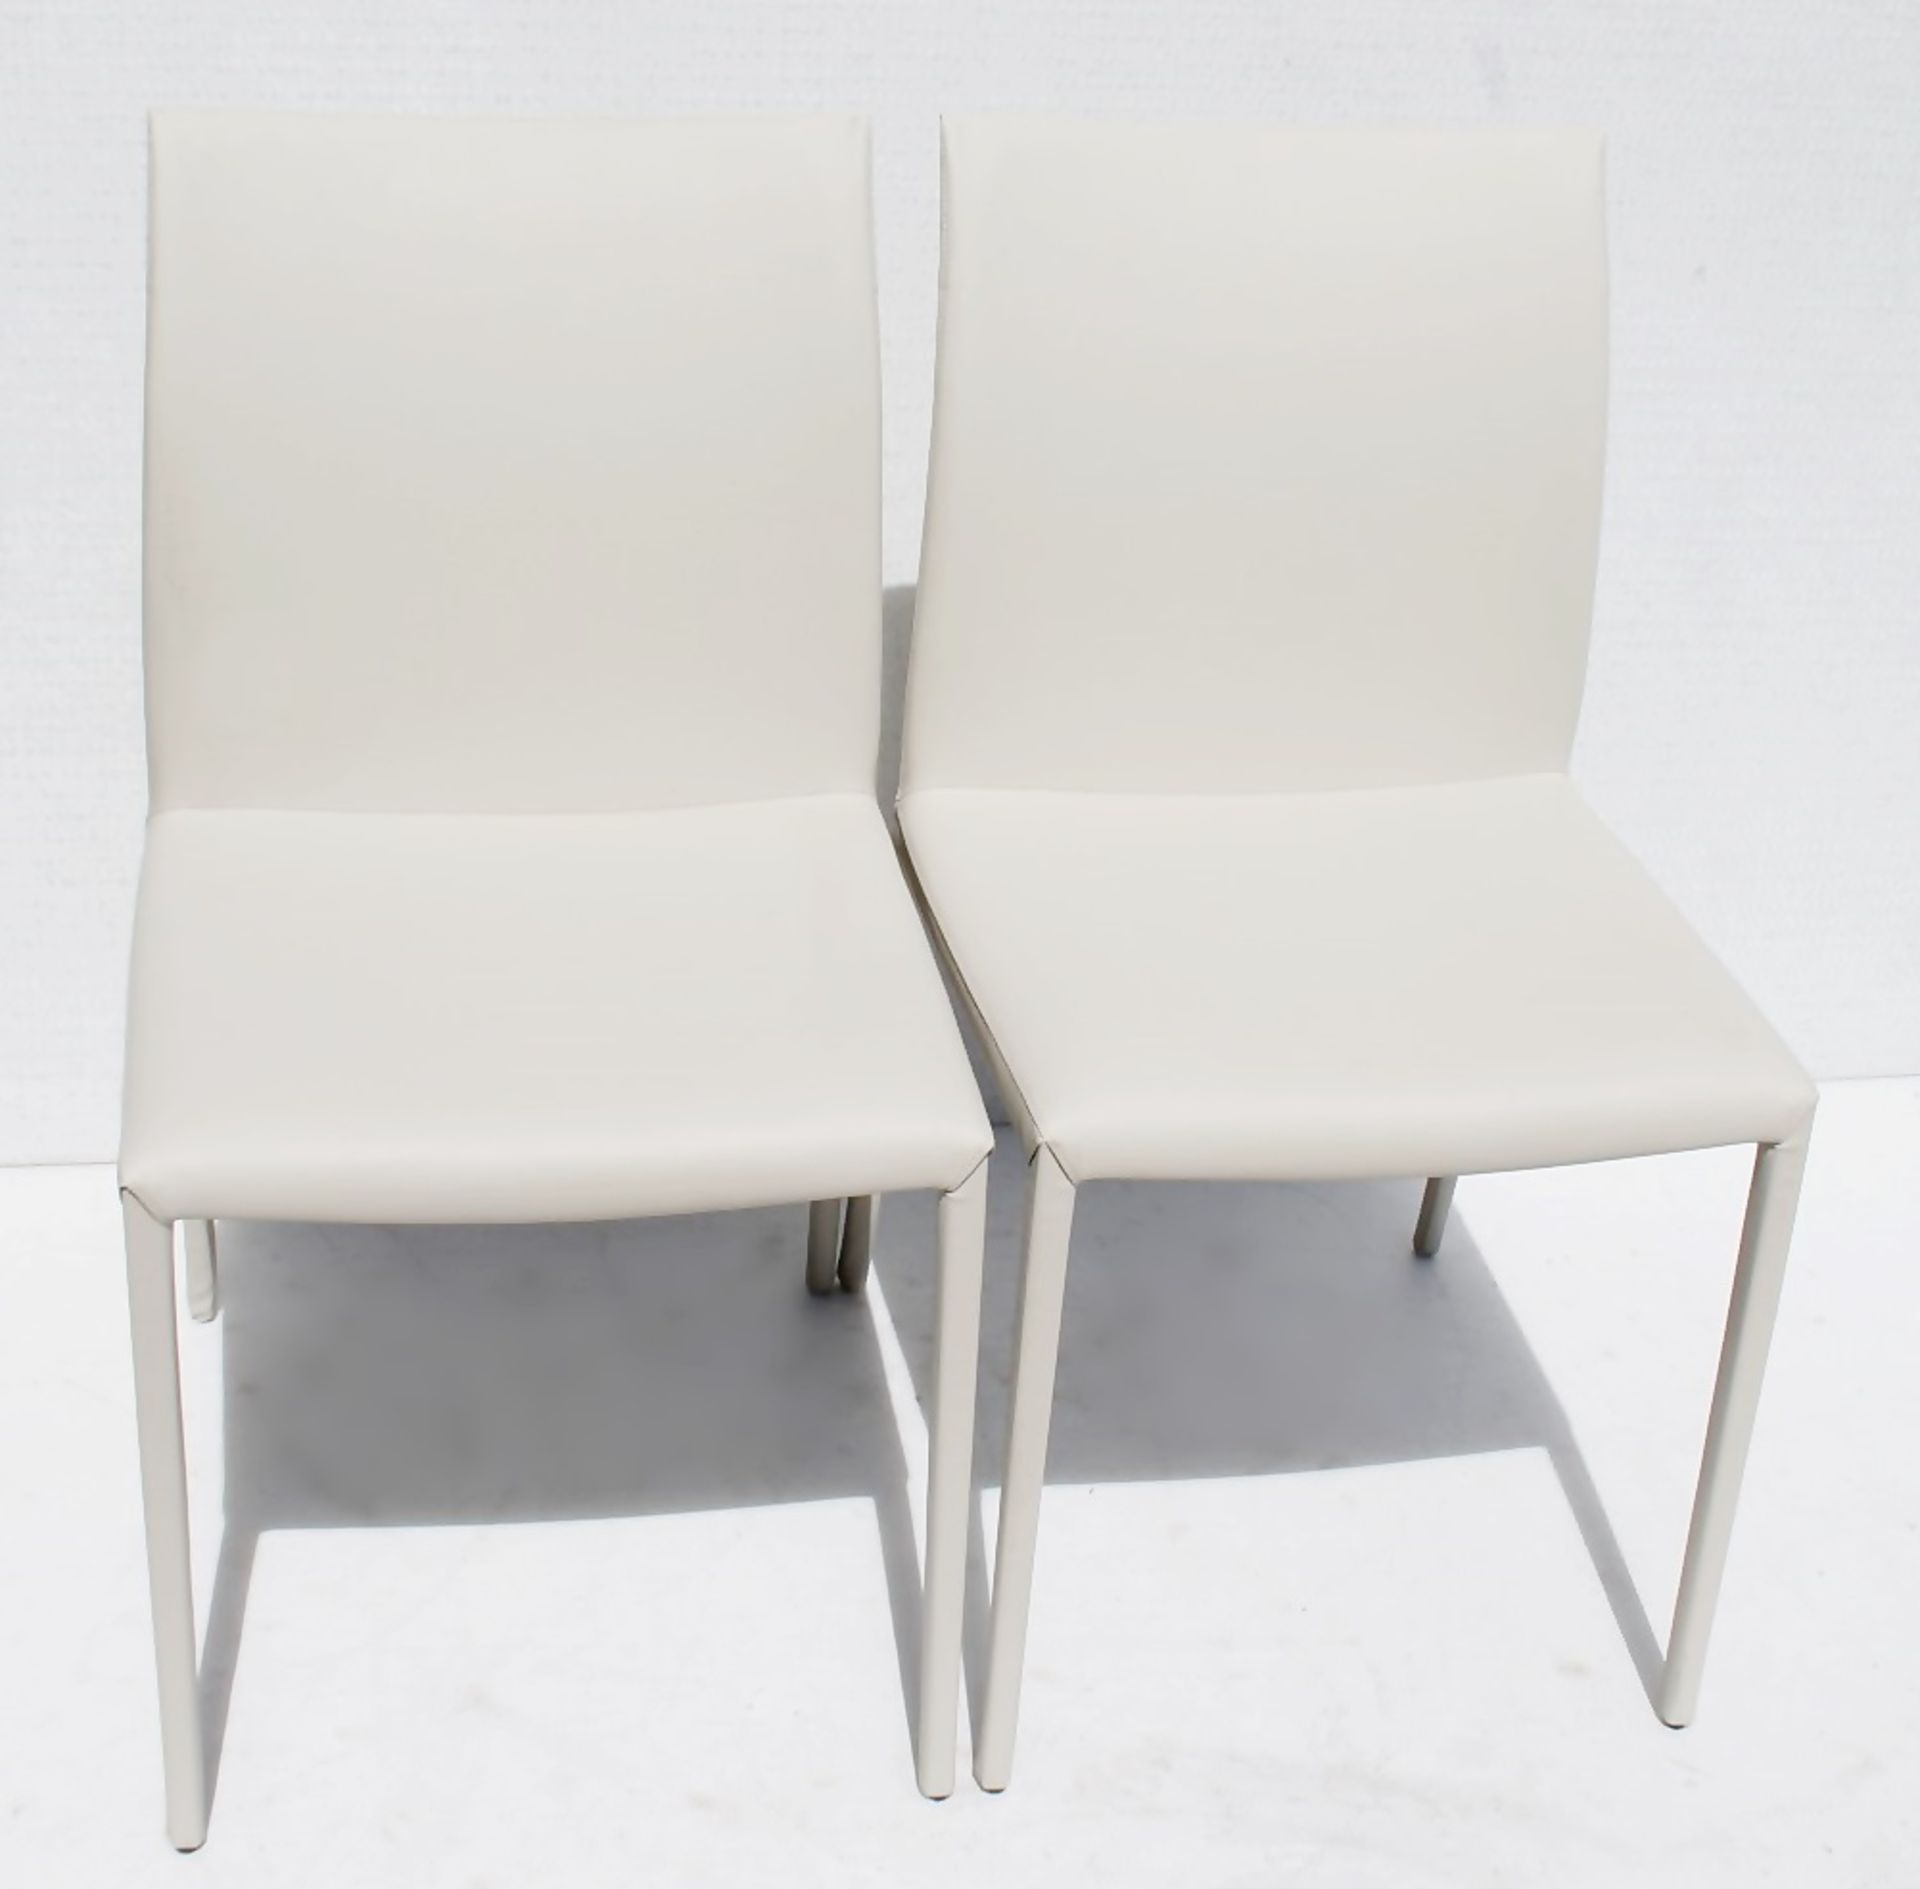 Pair Of CATELLAN 'Norma' Designer Italian Leather Barstools With Curved Backs In A Pale Taupe - - Image 3 of 6